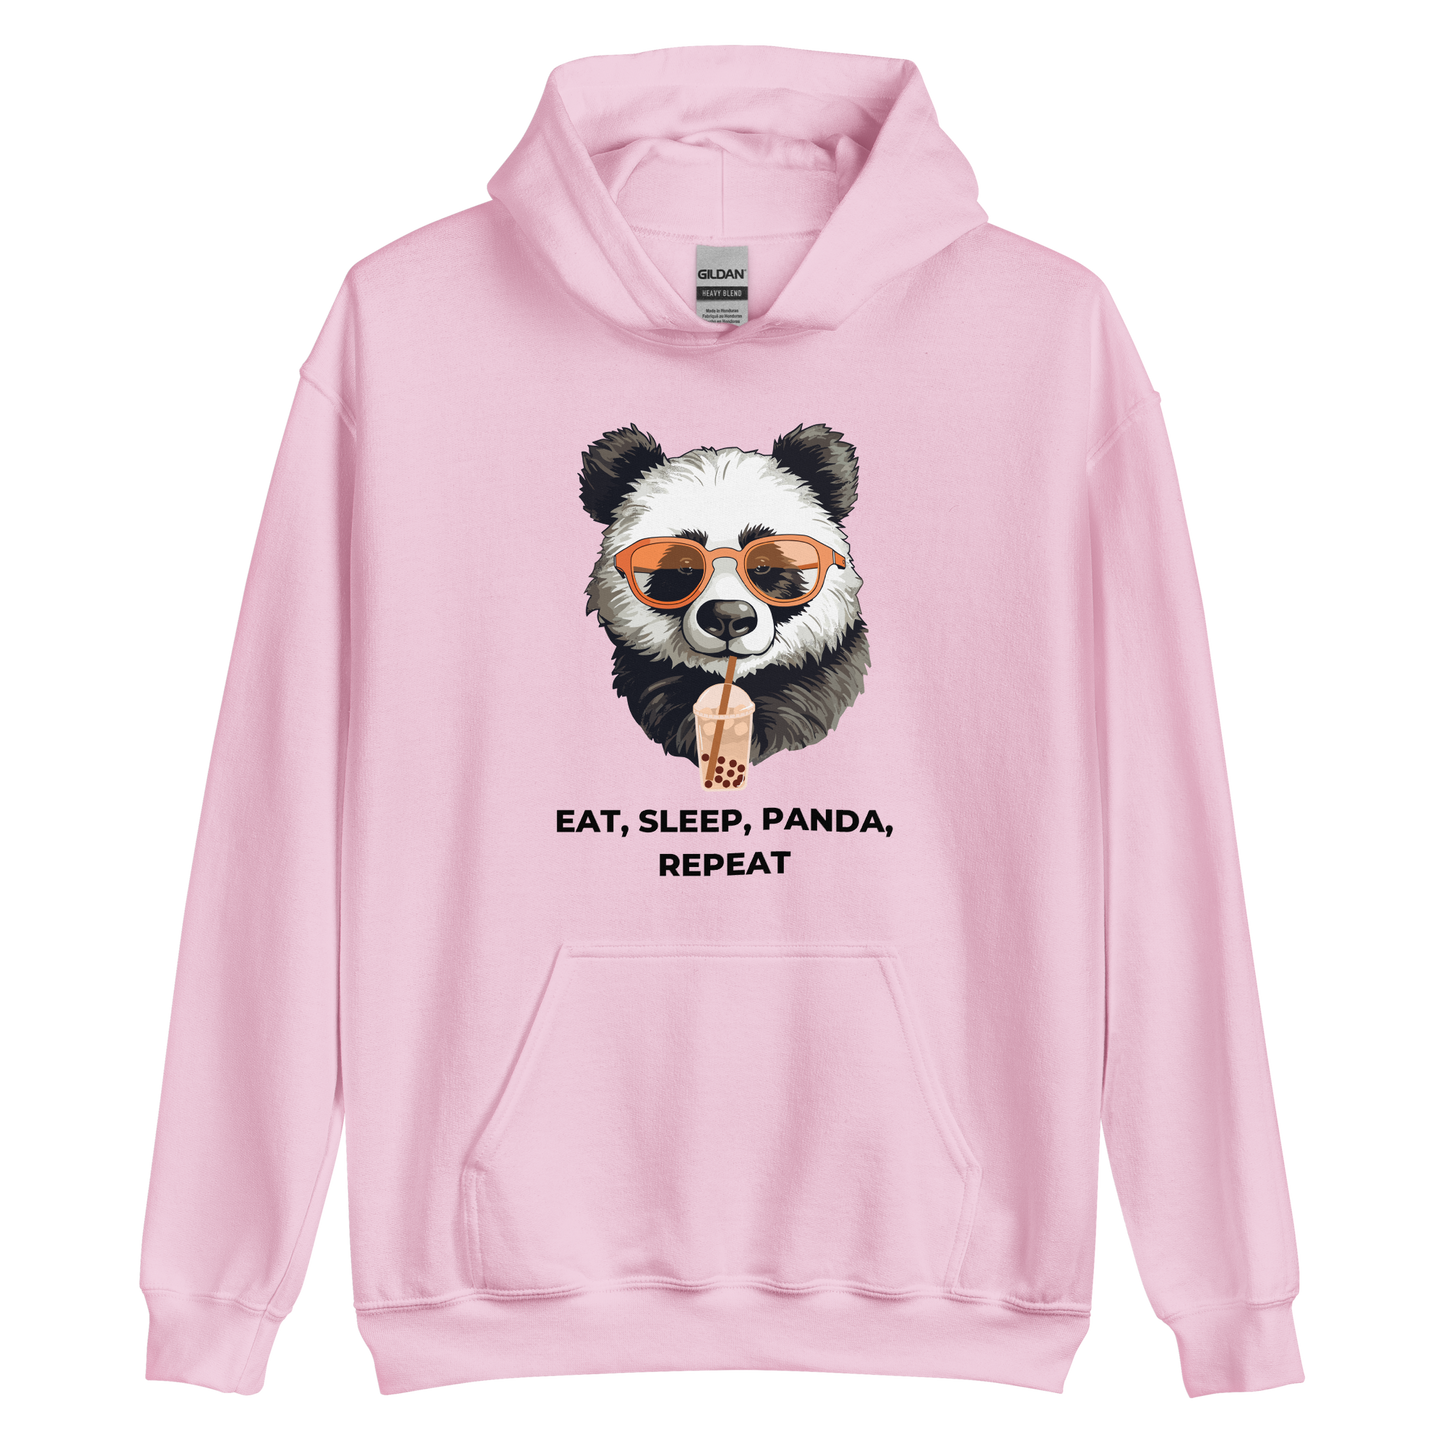 Light Pink Panda Hoodie featuring the hilarious Eat, Sleep, Panda, Repeat graphic on the chest - Funny Graphic Panda Hoodies - Boozy Fox